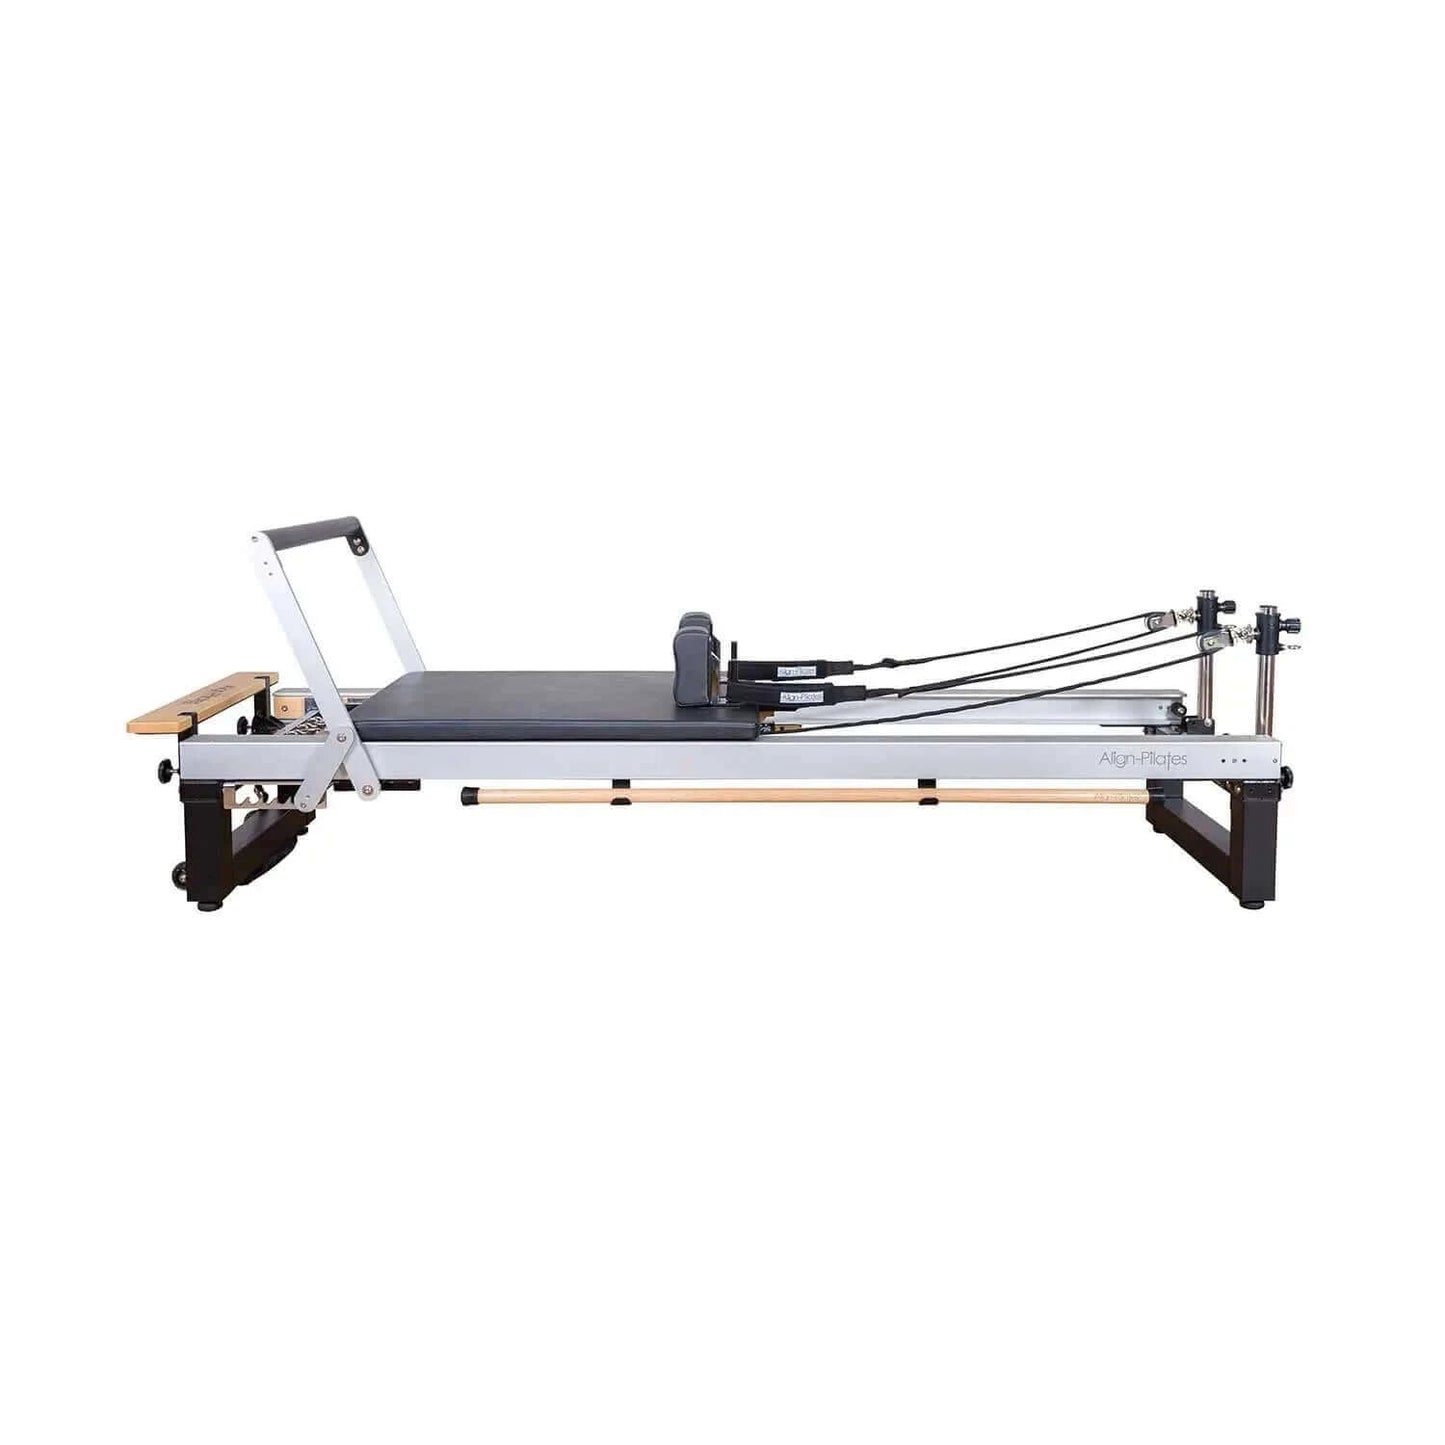  Align Pilates A8 Pro Reformer Machine by Align Pilates sold by Pilates Matters® by BSP LLC